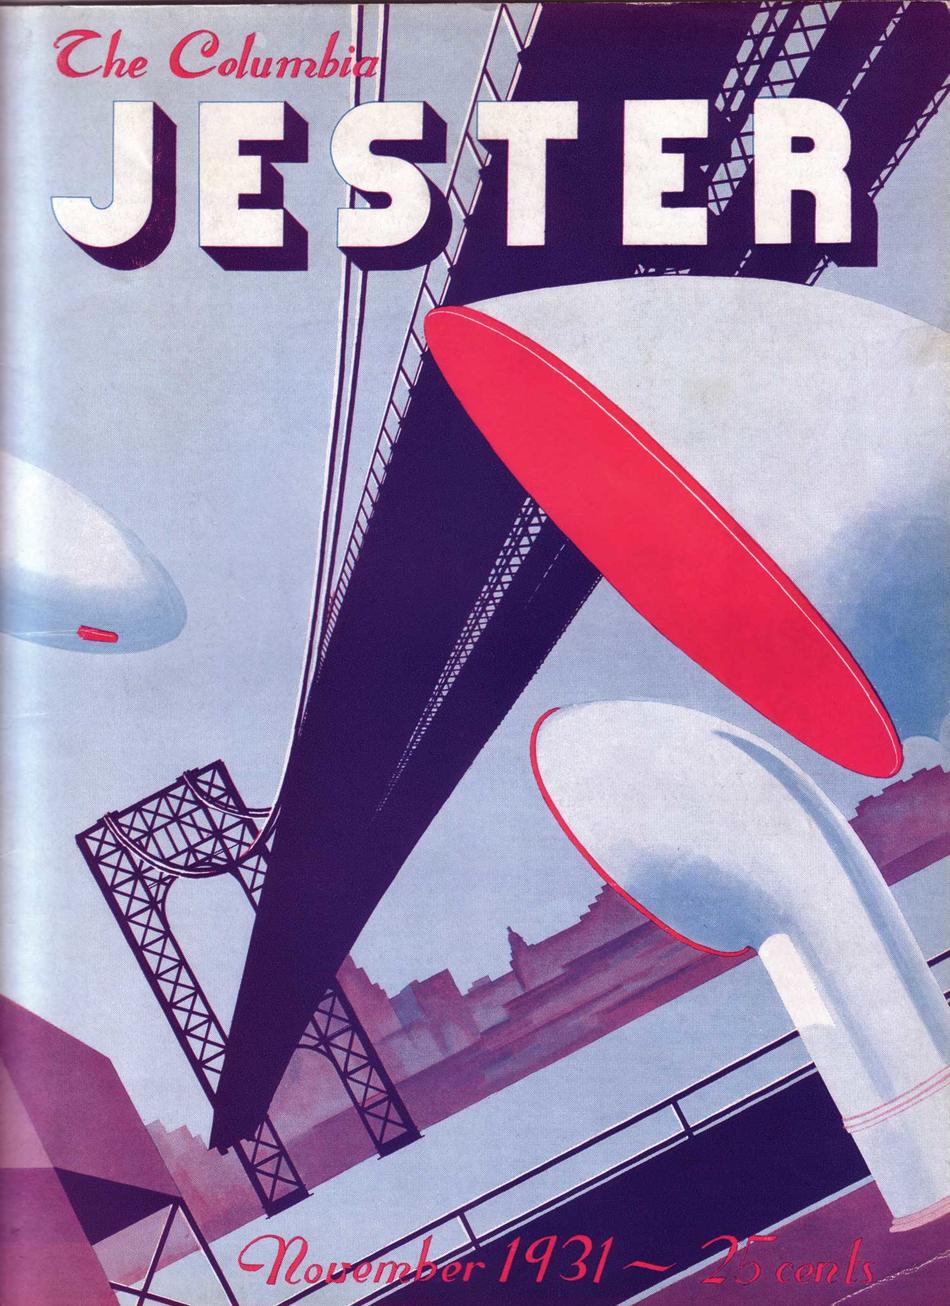 November 1931 edition of the Columbia Jester. featuring an illustration of the George Washington Bridge